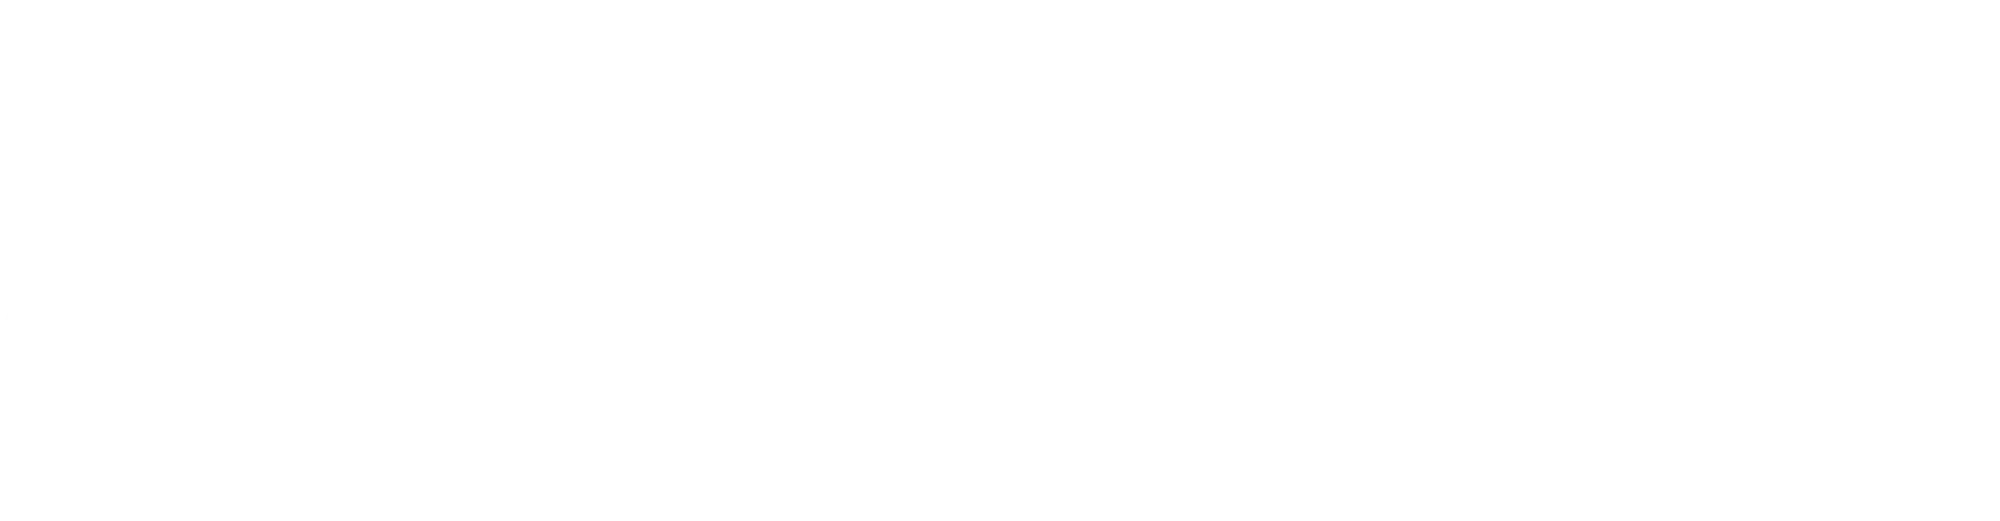 Change Maker's Choose logo of a white turtle on a grey background